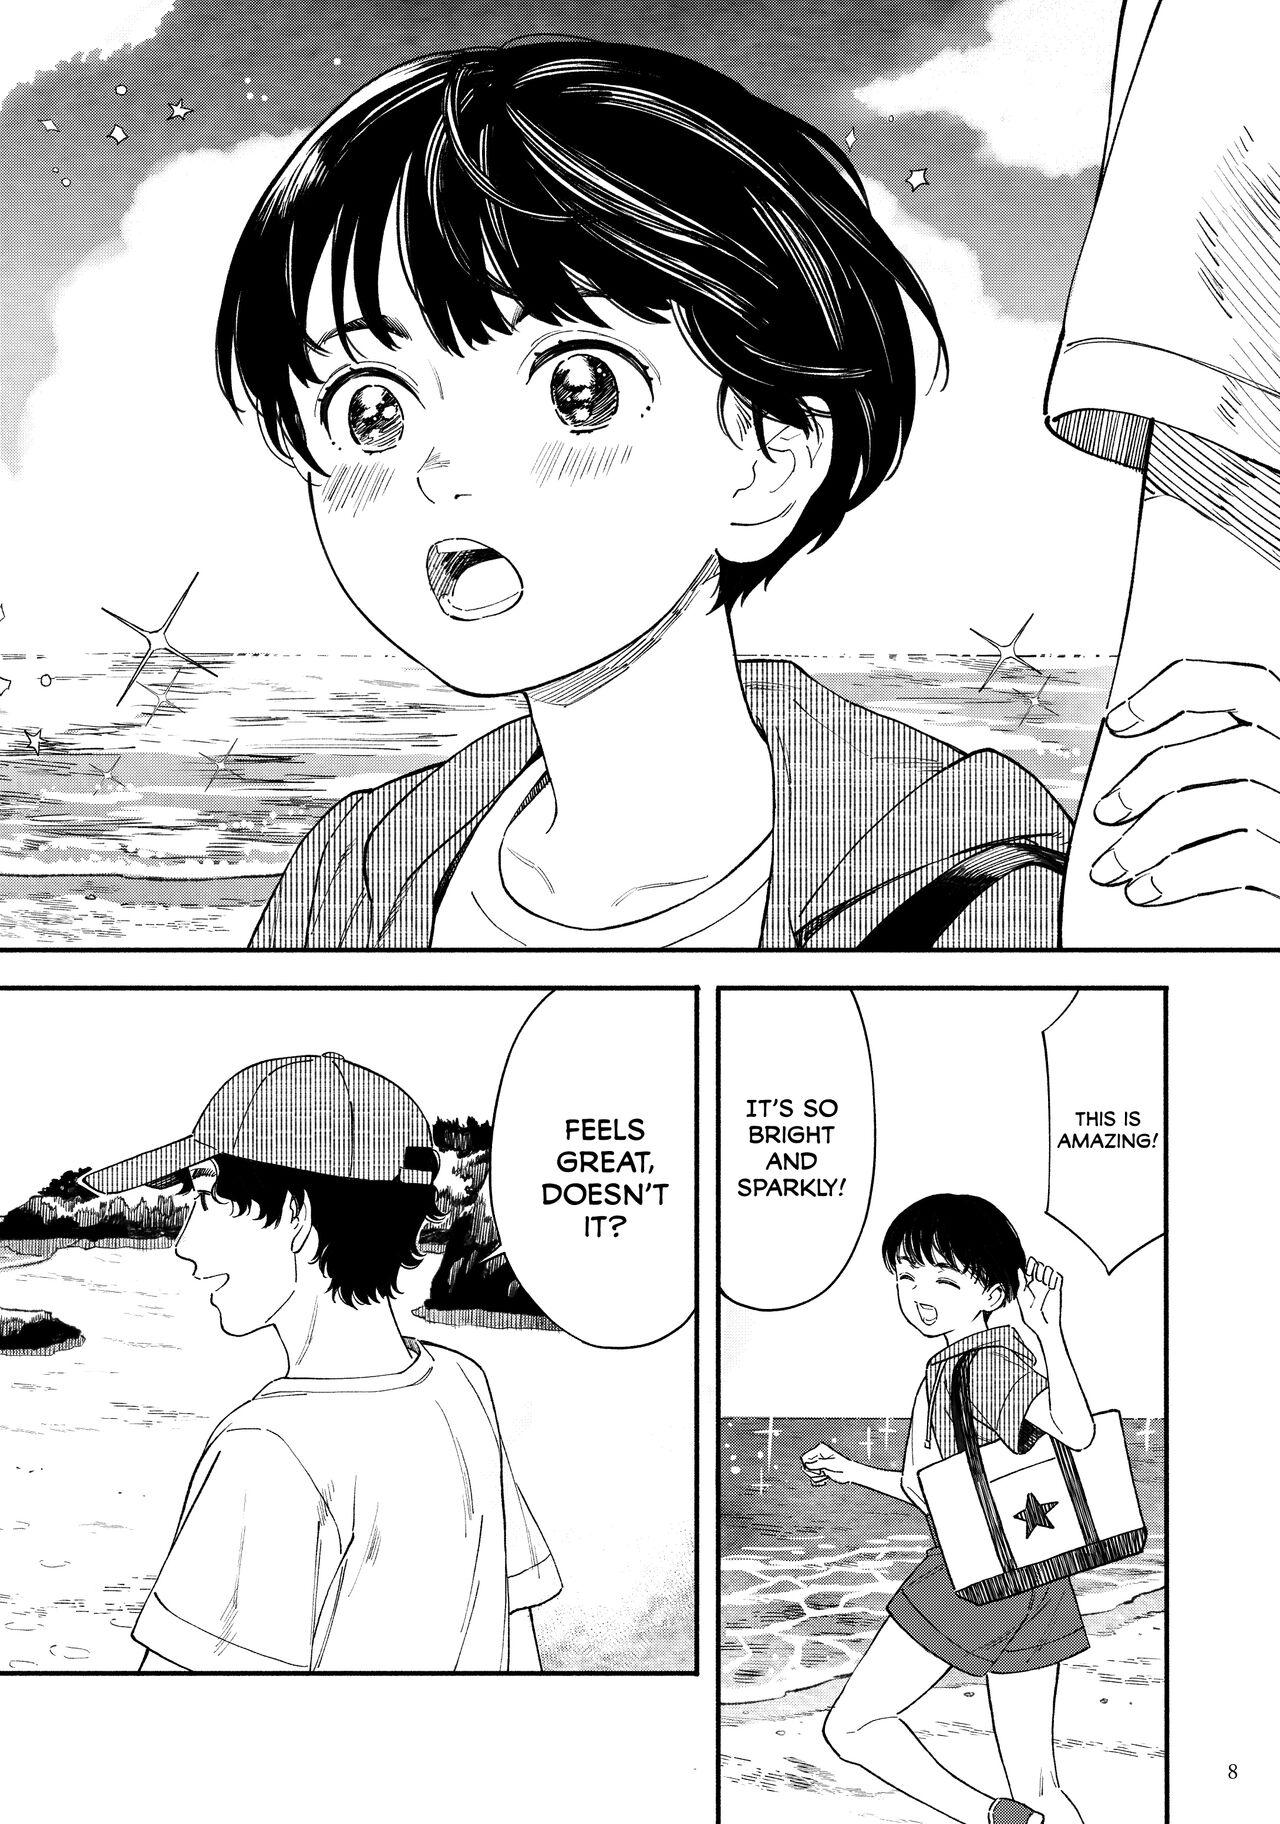 Adolescente Umi ni Ikou.｜Let's Go to the Beach. - Original Brother Sister - Page 8